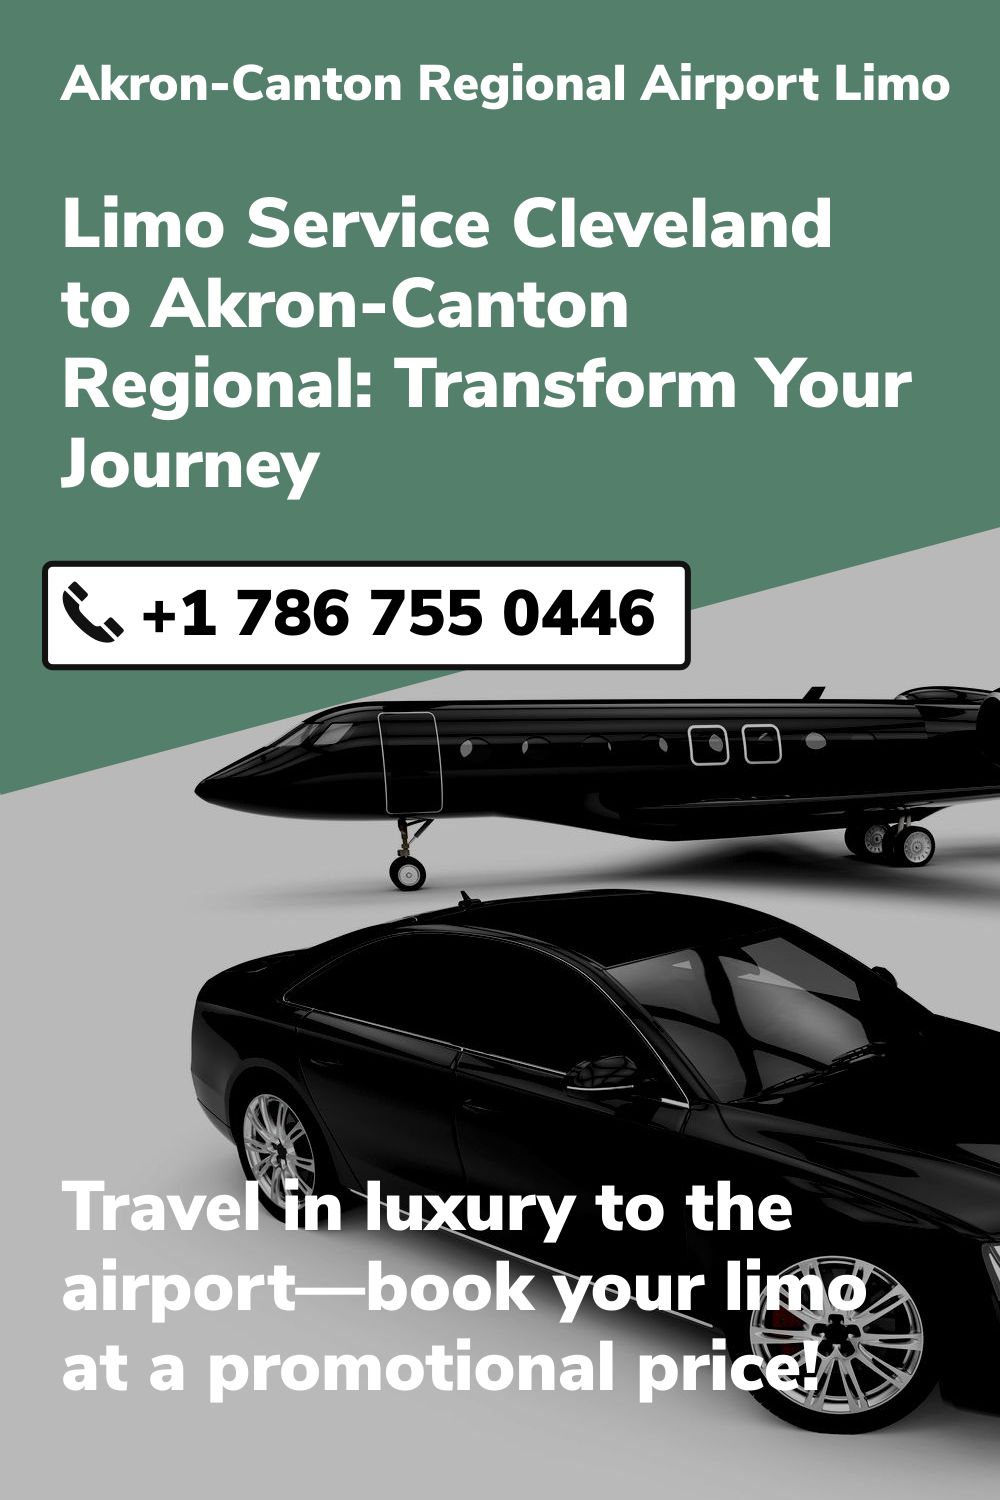 Akron-Canton Regional Airport Limo